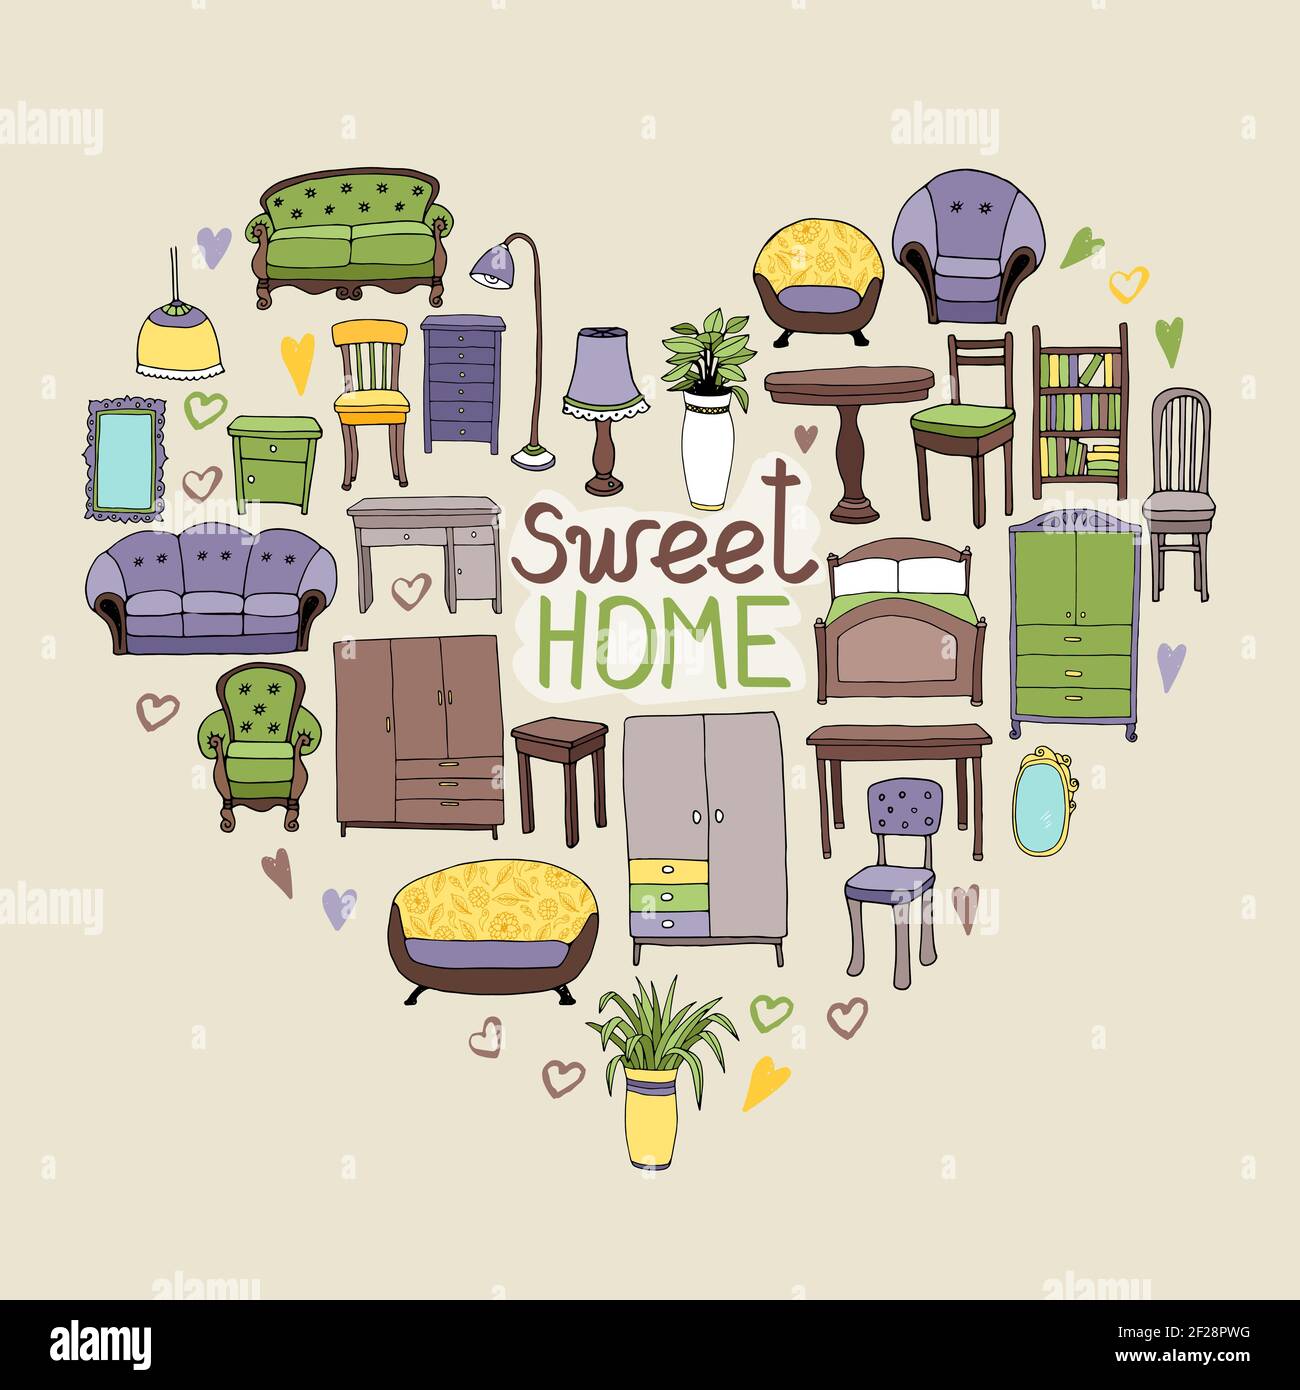 Sweet Home concept with various home accessories and furniture icons arranged in a heart shape symbolic of love and home interior decor with text - Sw Stock Vector